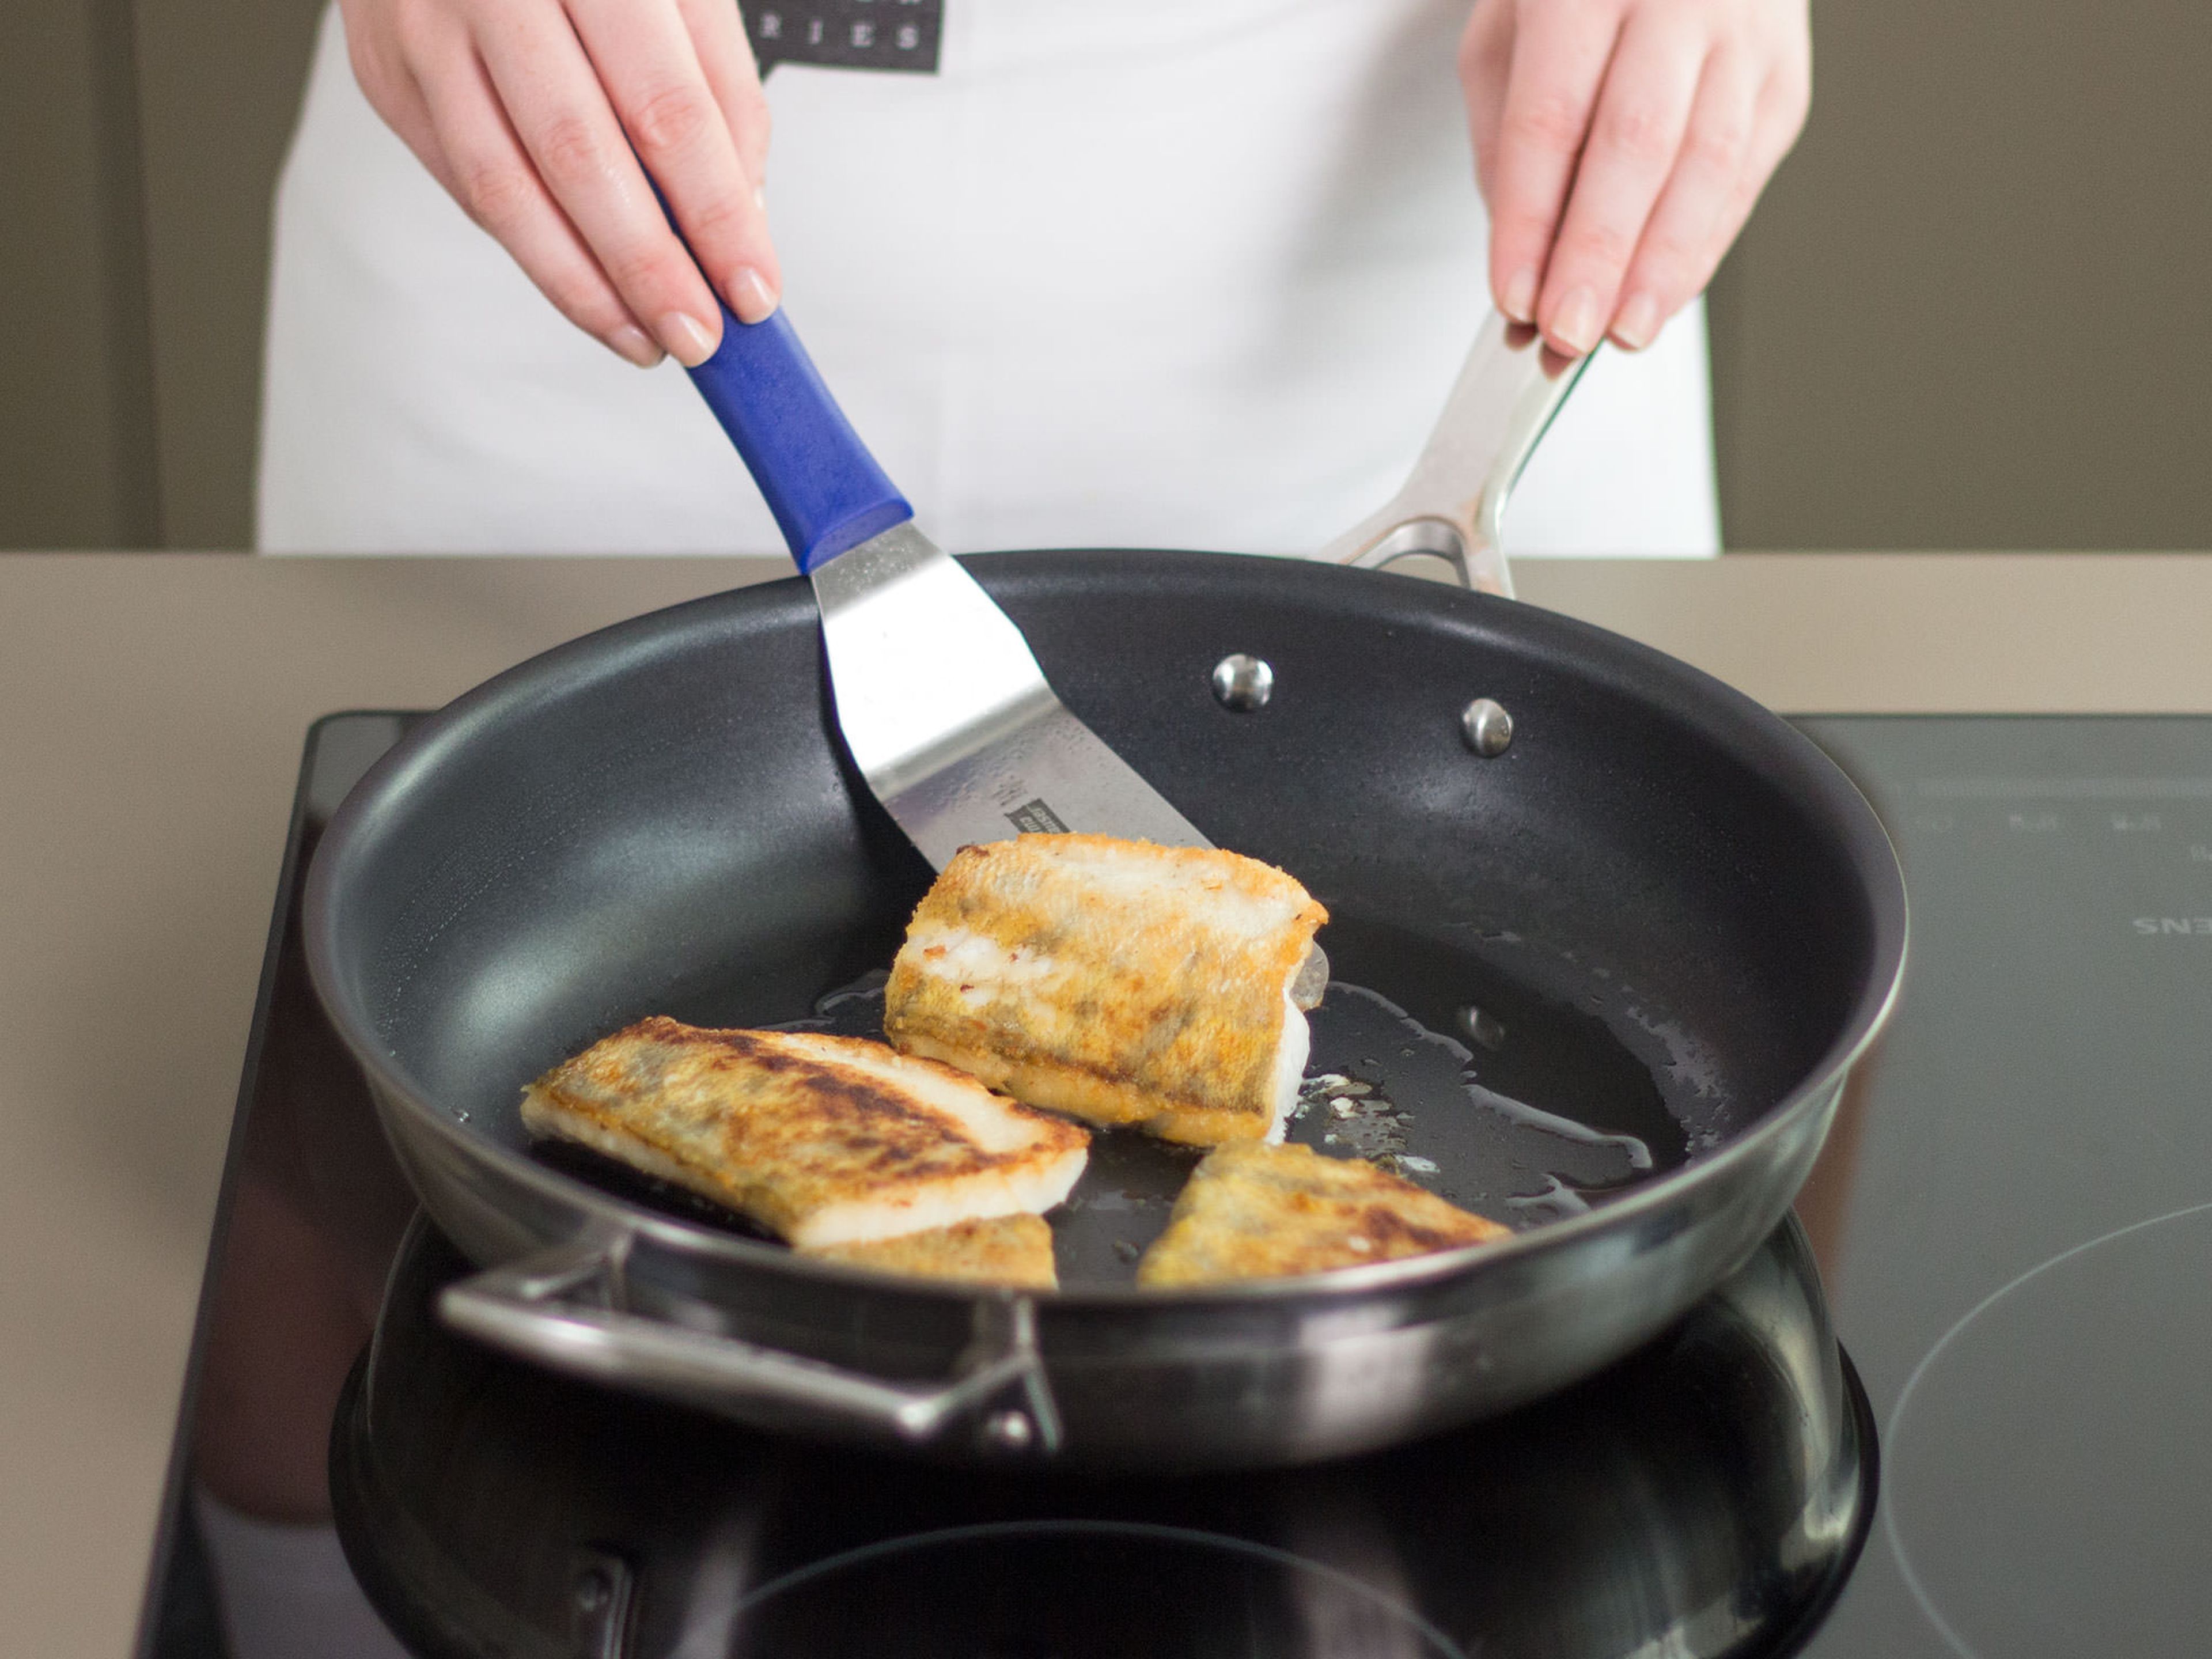 In a large frying pan, sauté perch in some vegetable oil over medium heat for approx. 1 – 3 min. per side. Season to taste with salt and pepper. Serve perch on a bed of sautéed cabbage and garnish with crispy cabbage leaves. Enjoy!